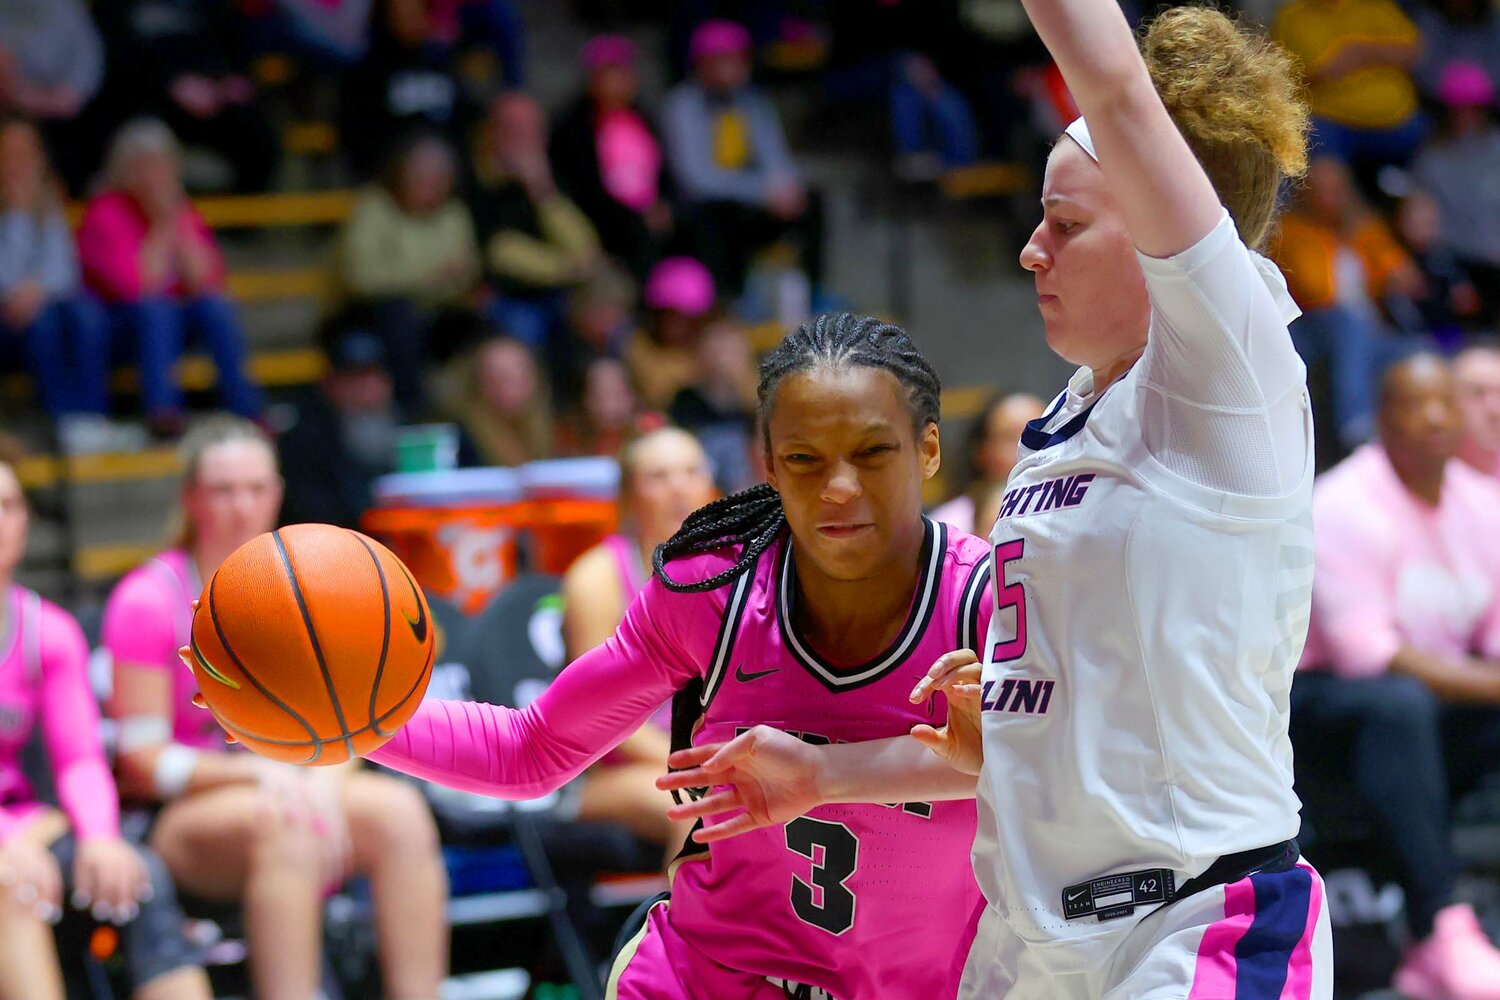 Jayla Smith of Purdue - driving into Gretchen Dolan of Illinois